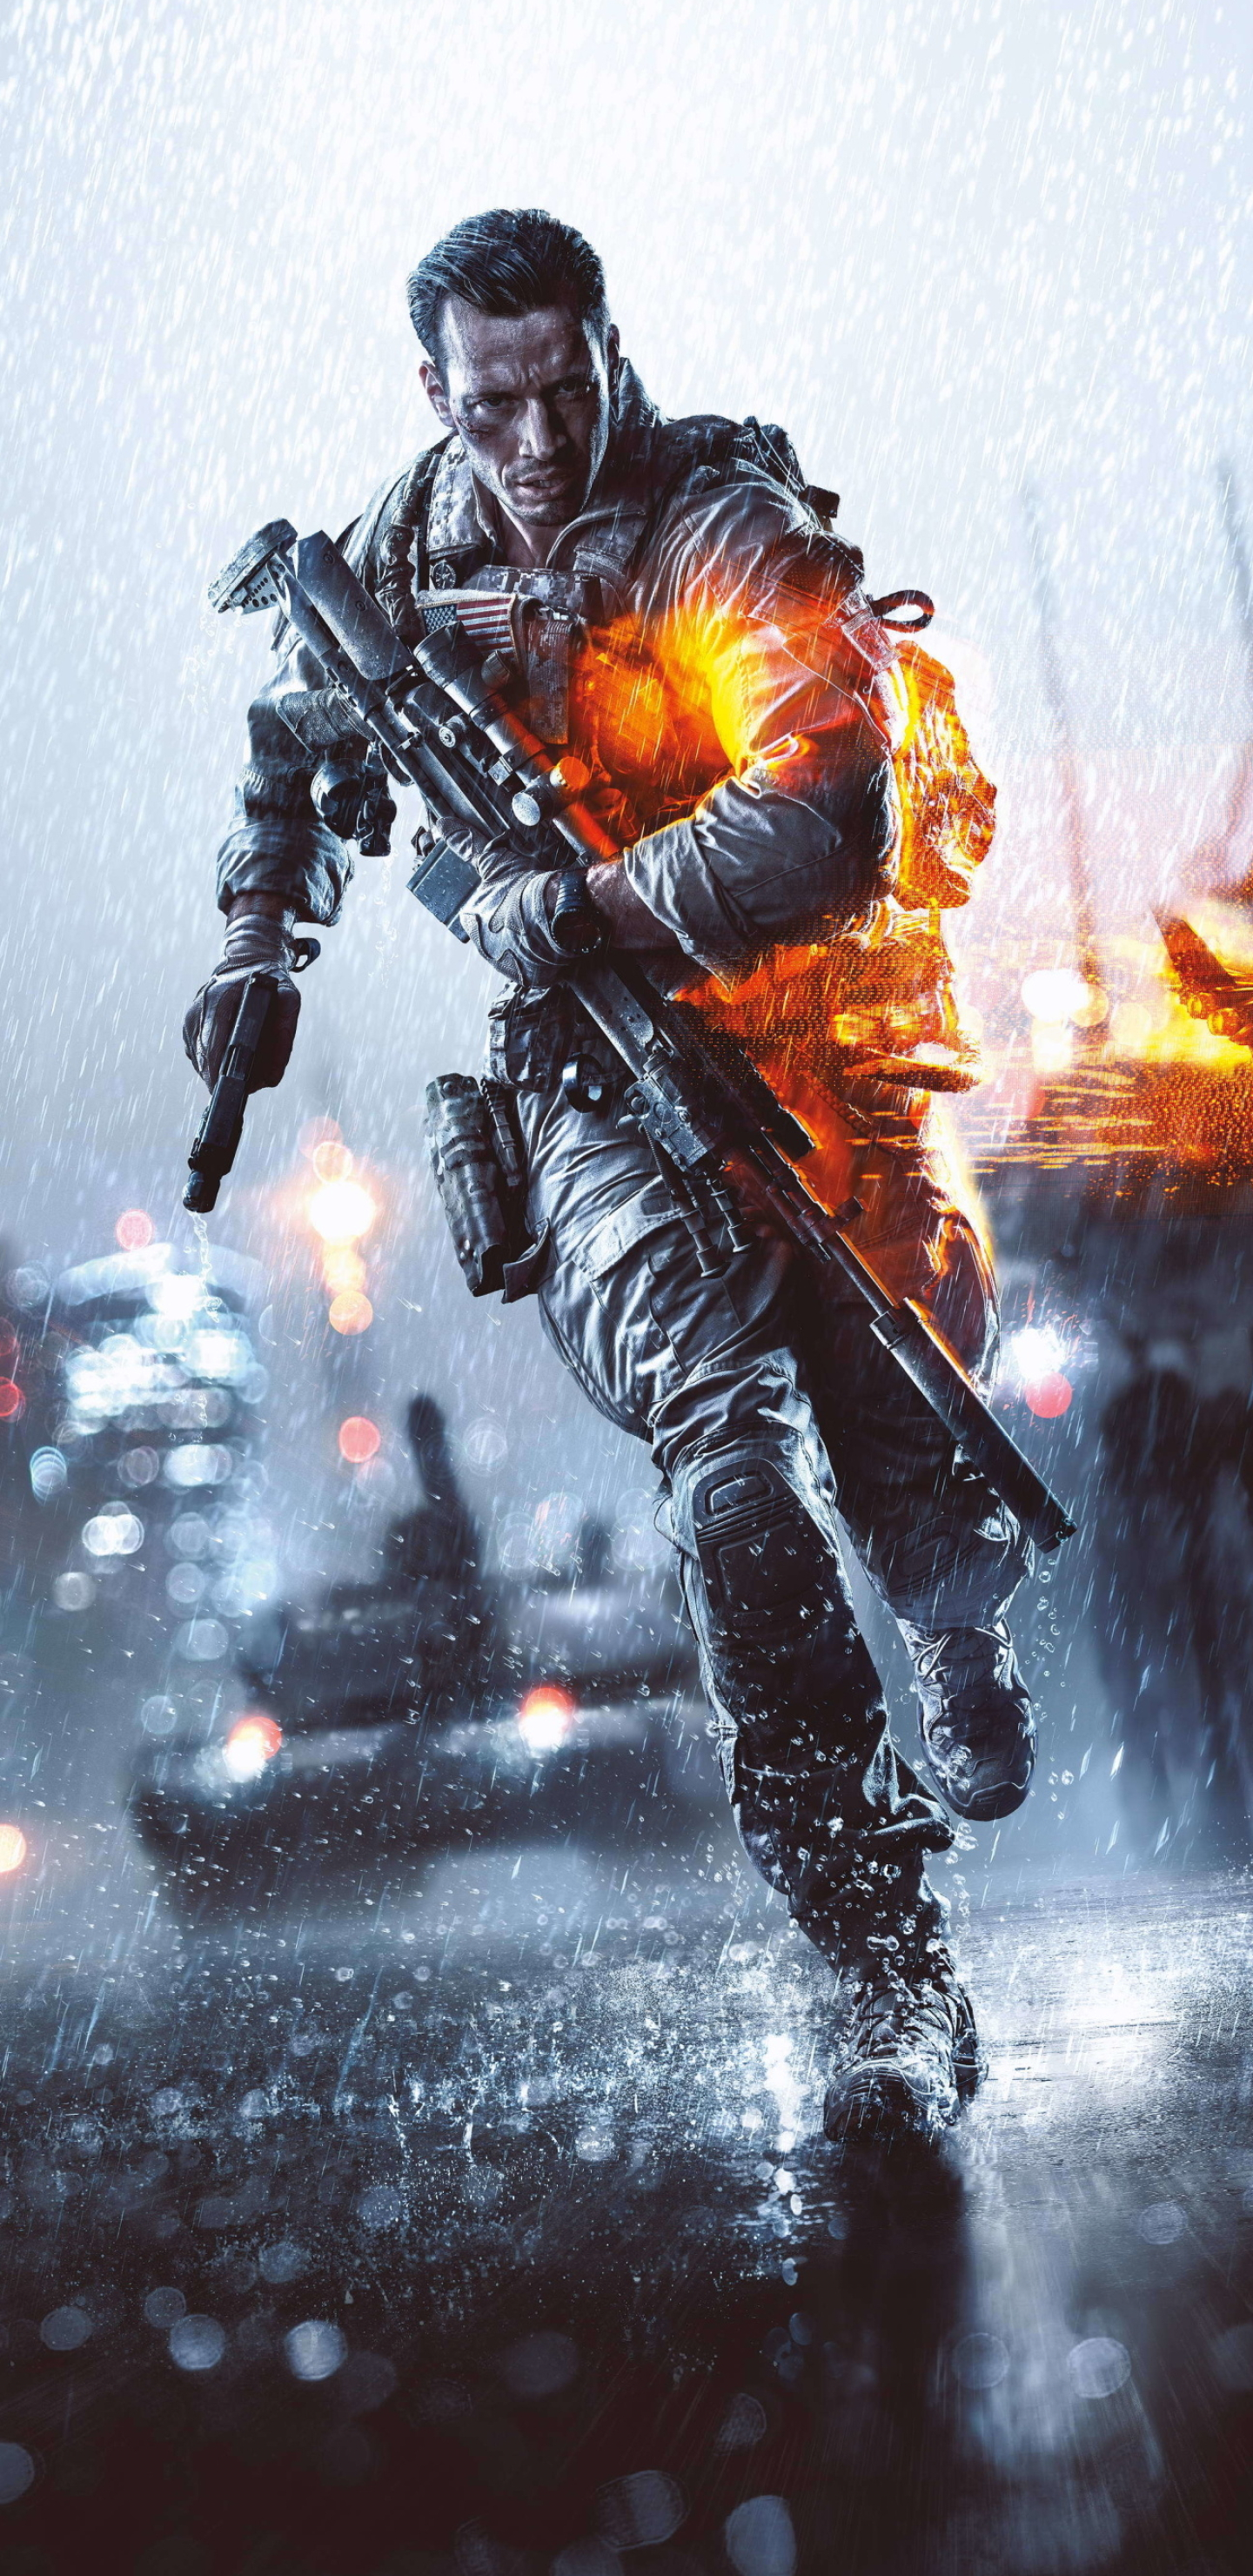 Shooter Game, Gaming, video game battlefield 4, battlefield 4 game, 1440x2960 HD Phone